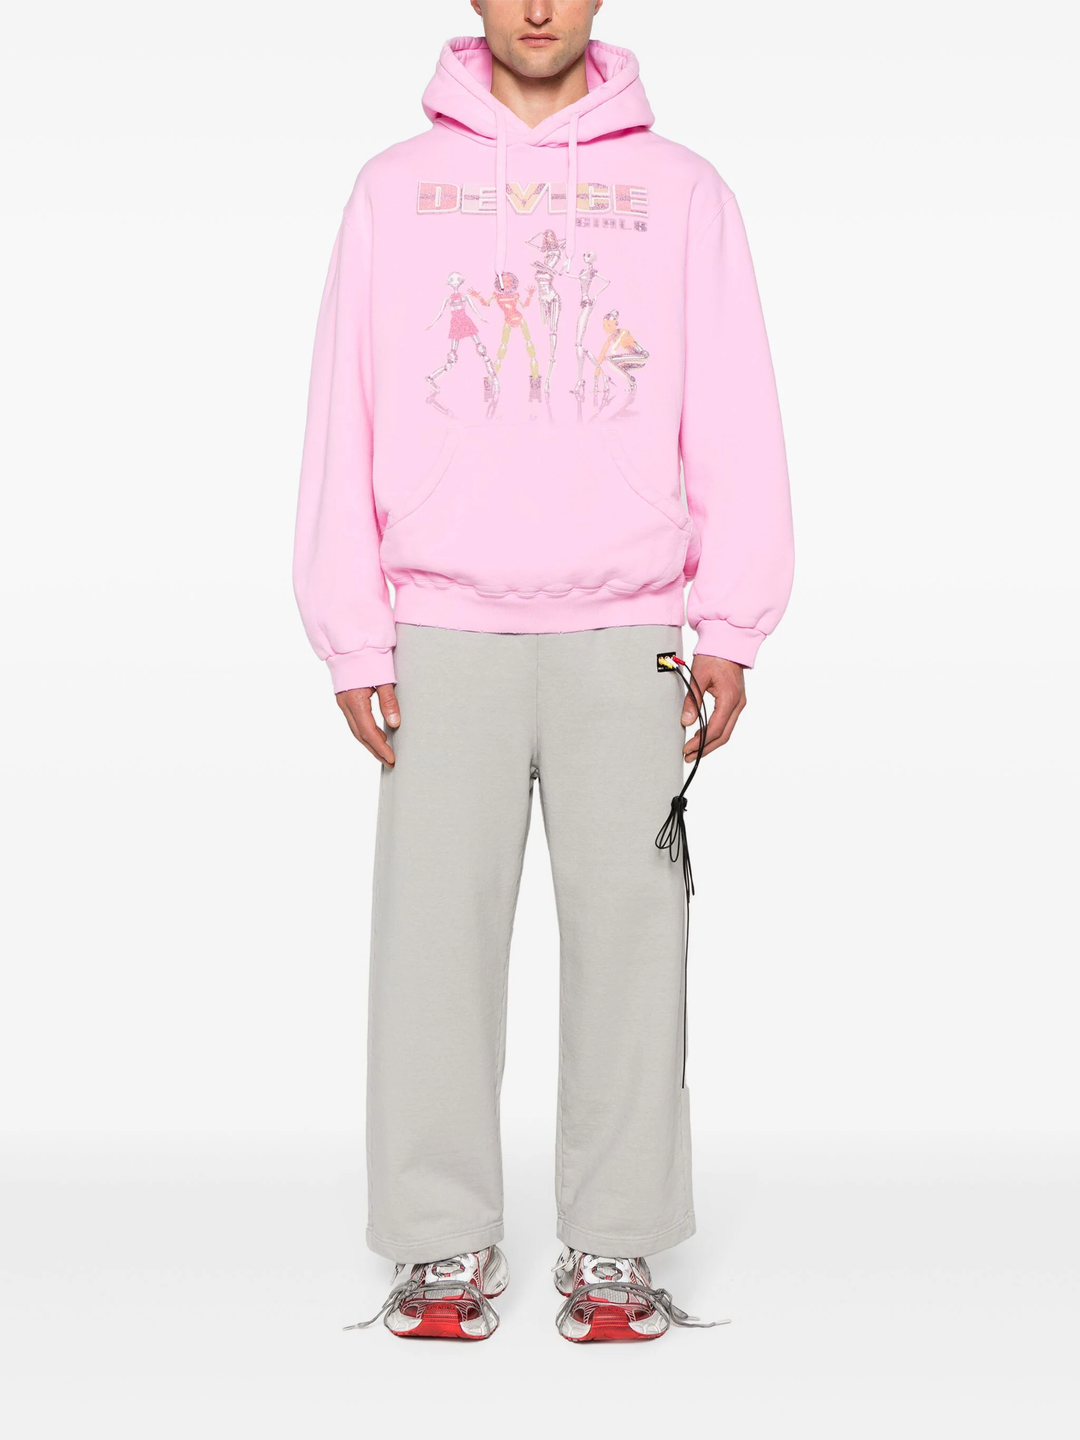 Rca Cable Embroidery Sweatpant